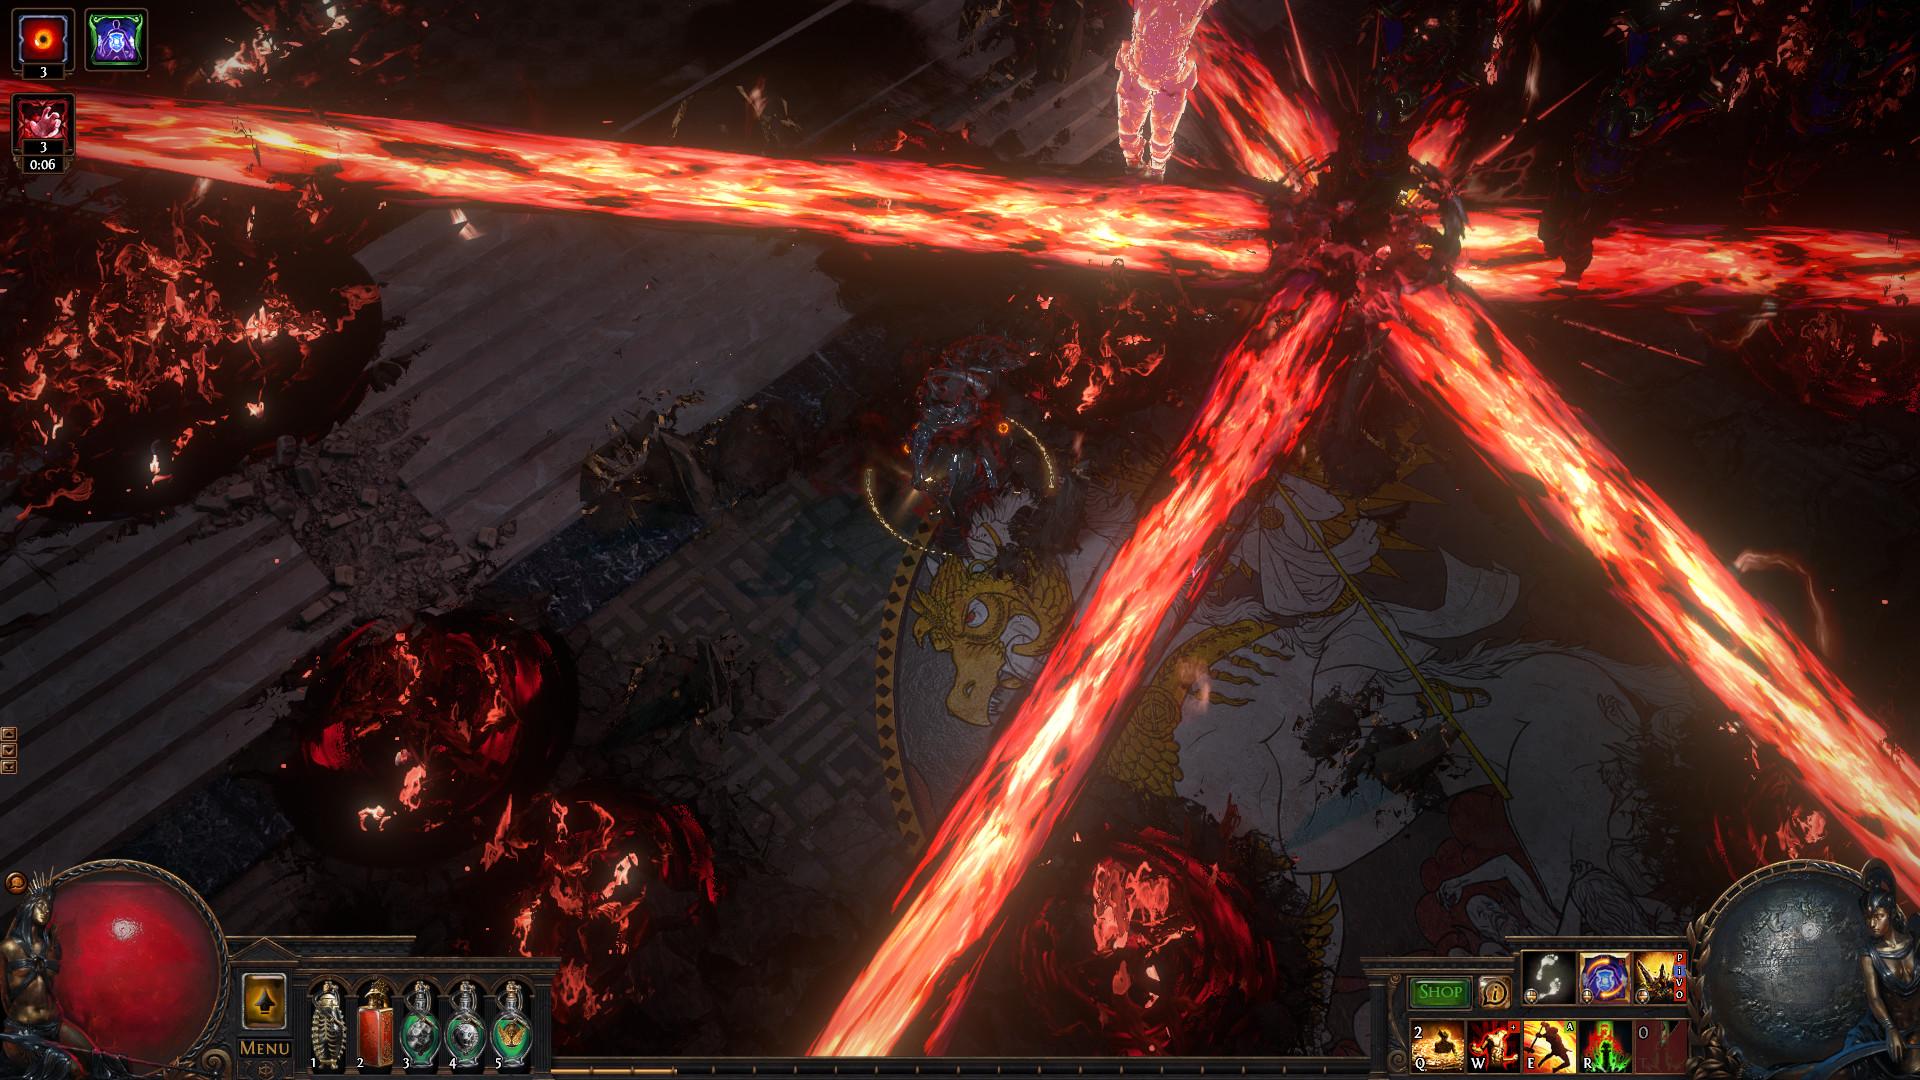 Screenshot №4 from game Path of Exile